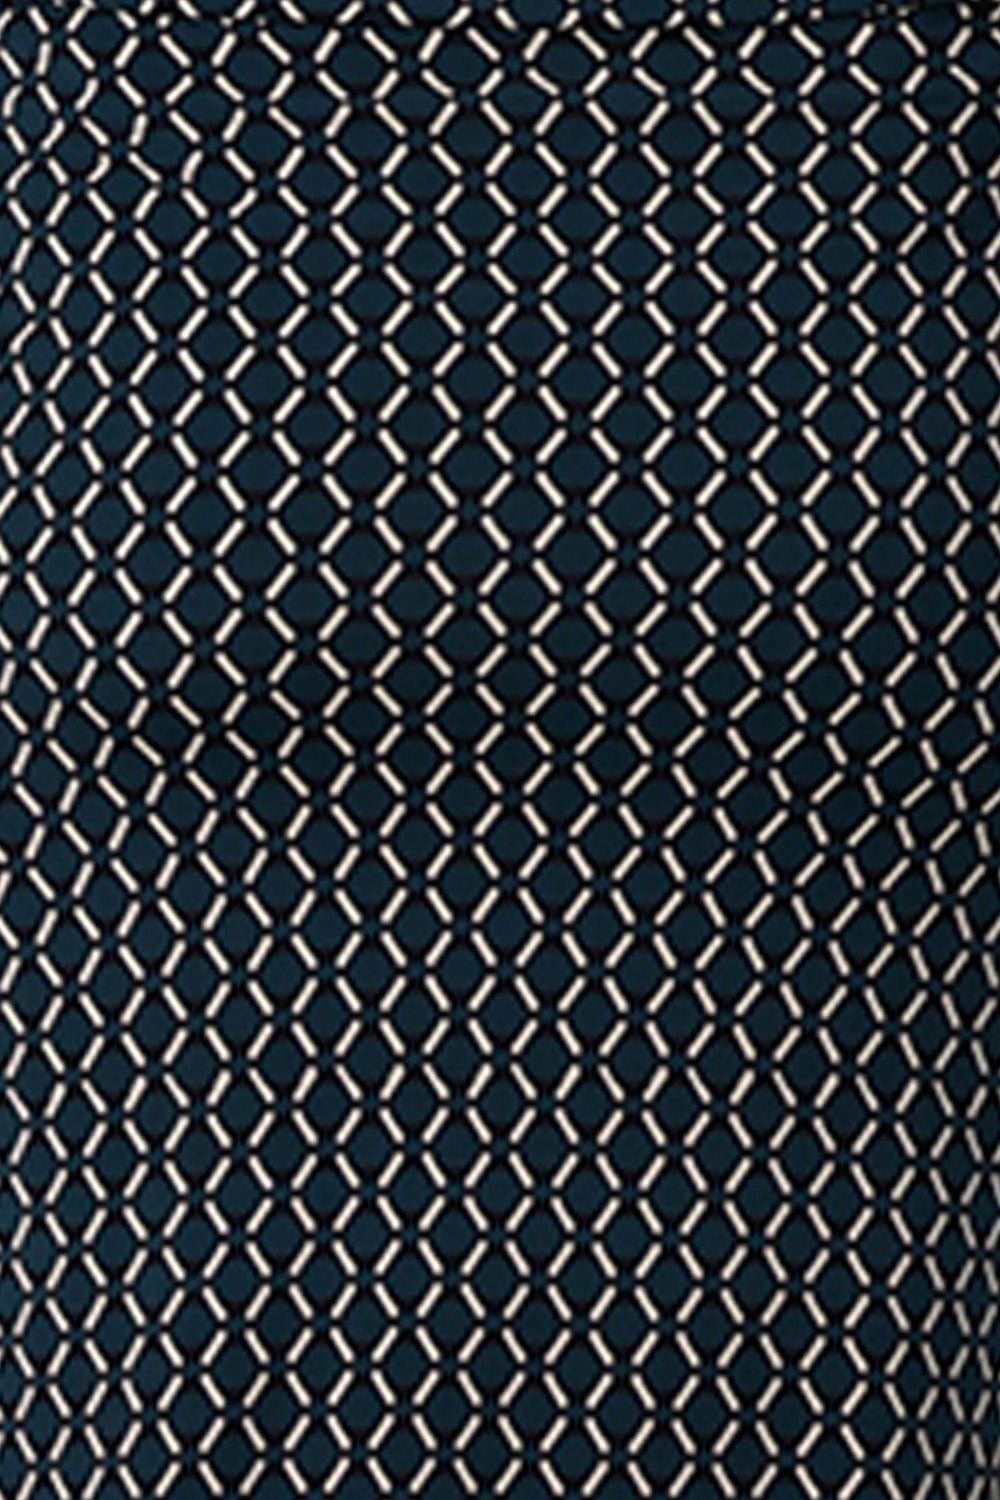 Swatch of Infinity print jersey used by Australian and New Zealand women's clothes label, Leina & Fleur to make a range of workwear tops, dresses and skirts for women.